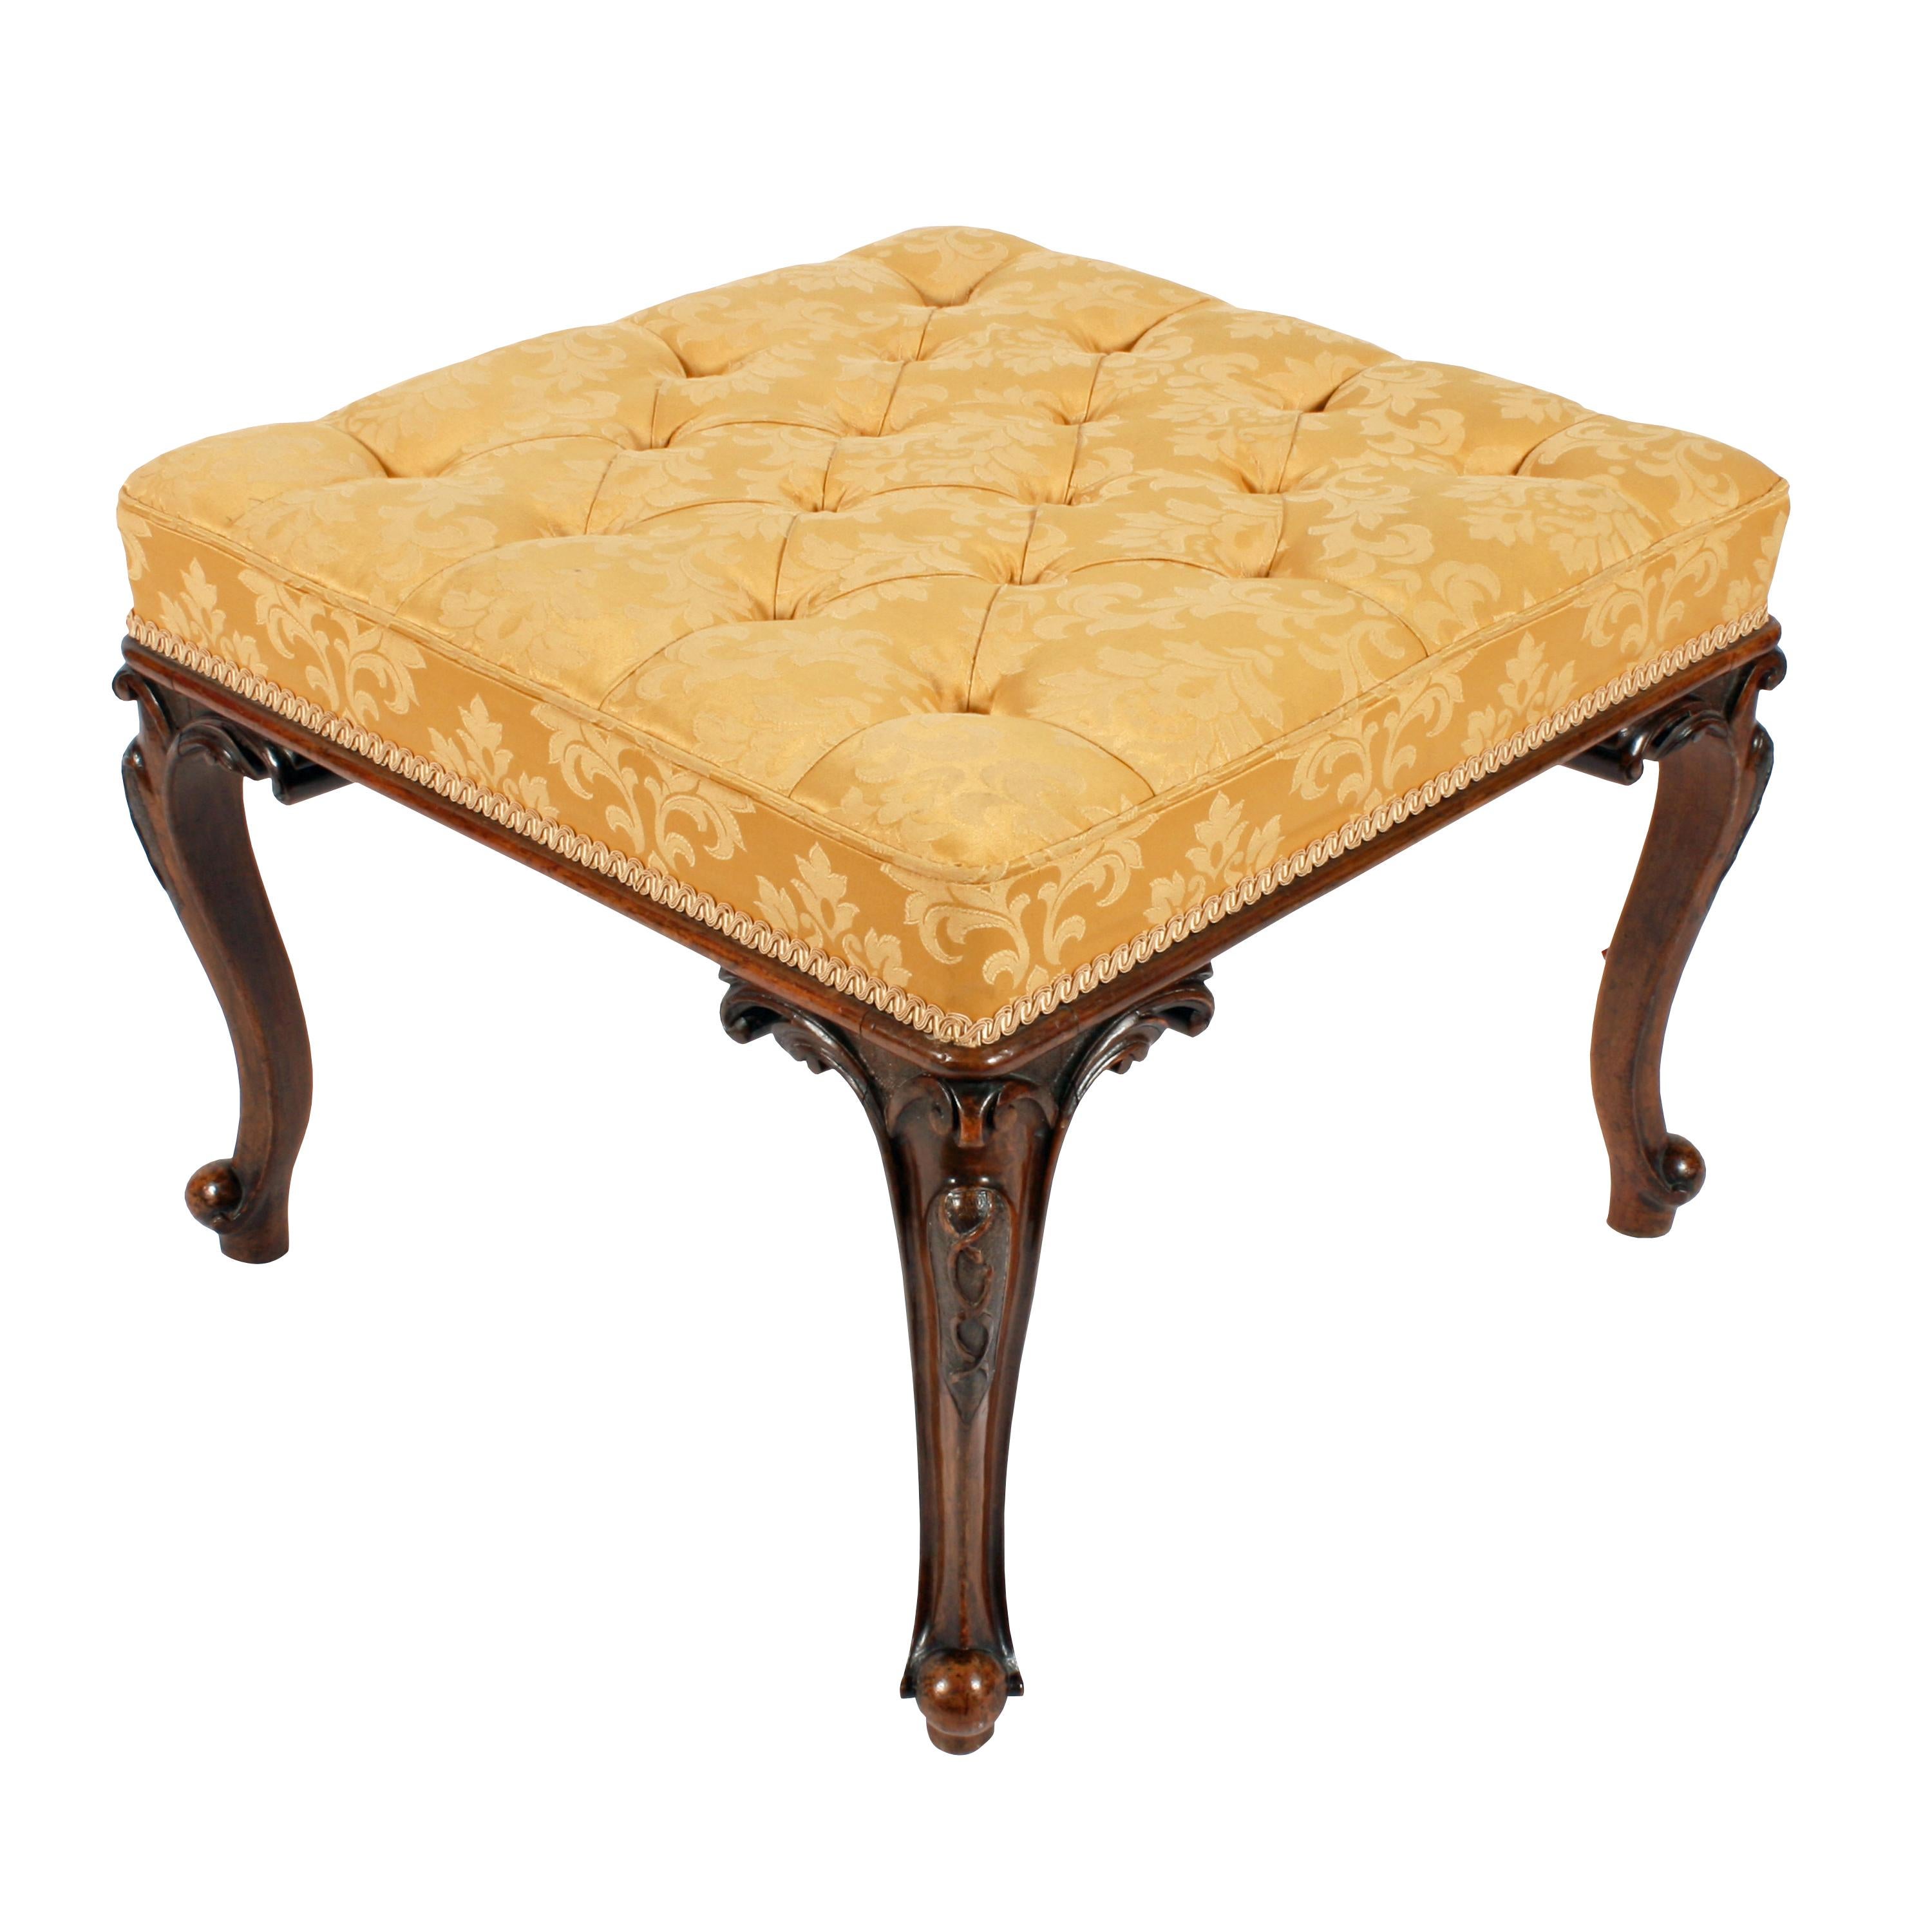 A fine quality mid-19th century Victorian square carved walnut stool.

The stool has four cabriole legs with scrolled toes and carved knees.

The contemporary button upholstered seat has a piped edge and a braid above the walnut molded